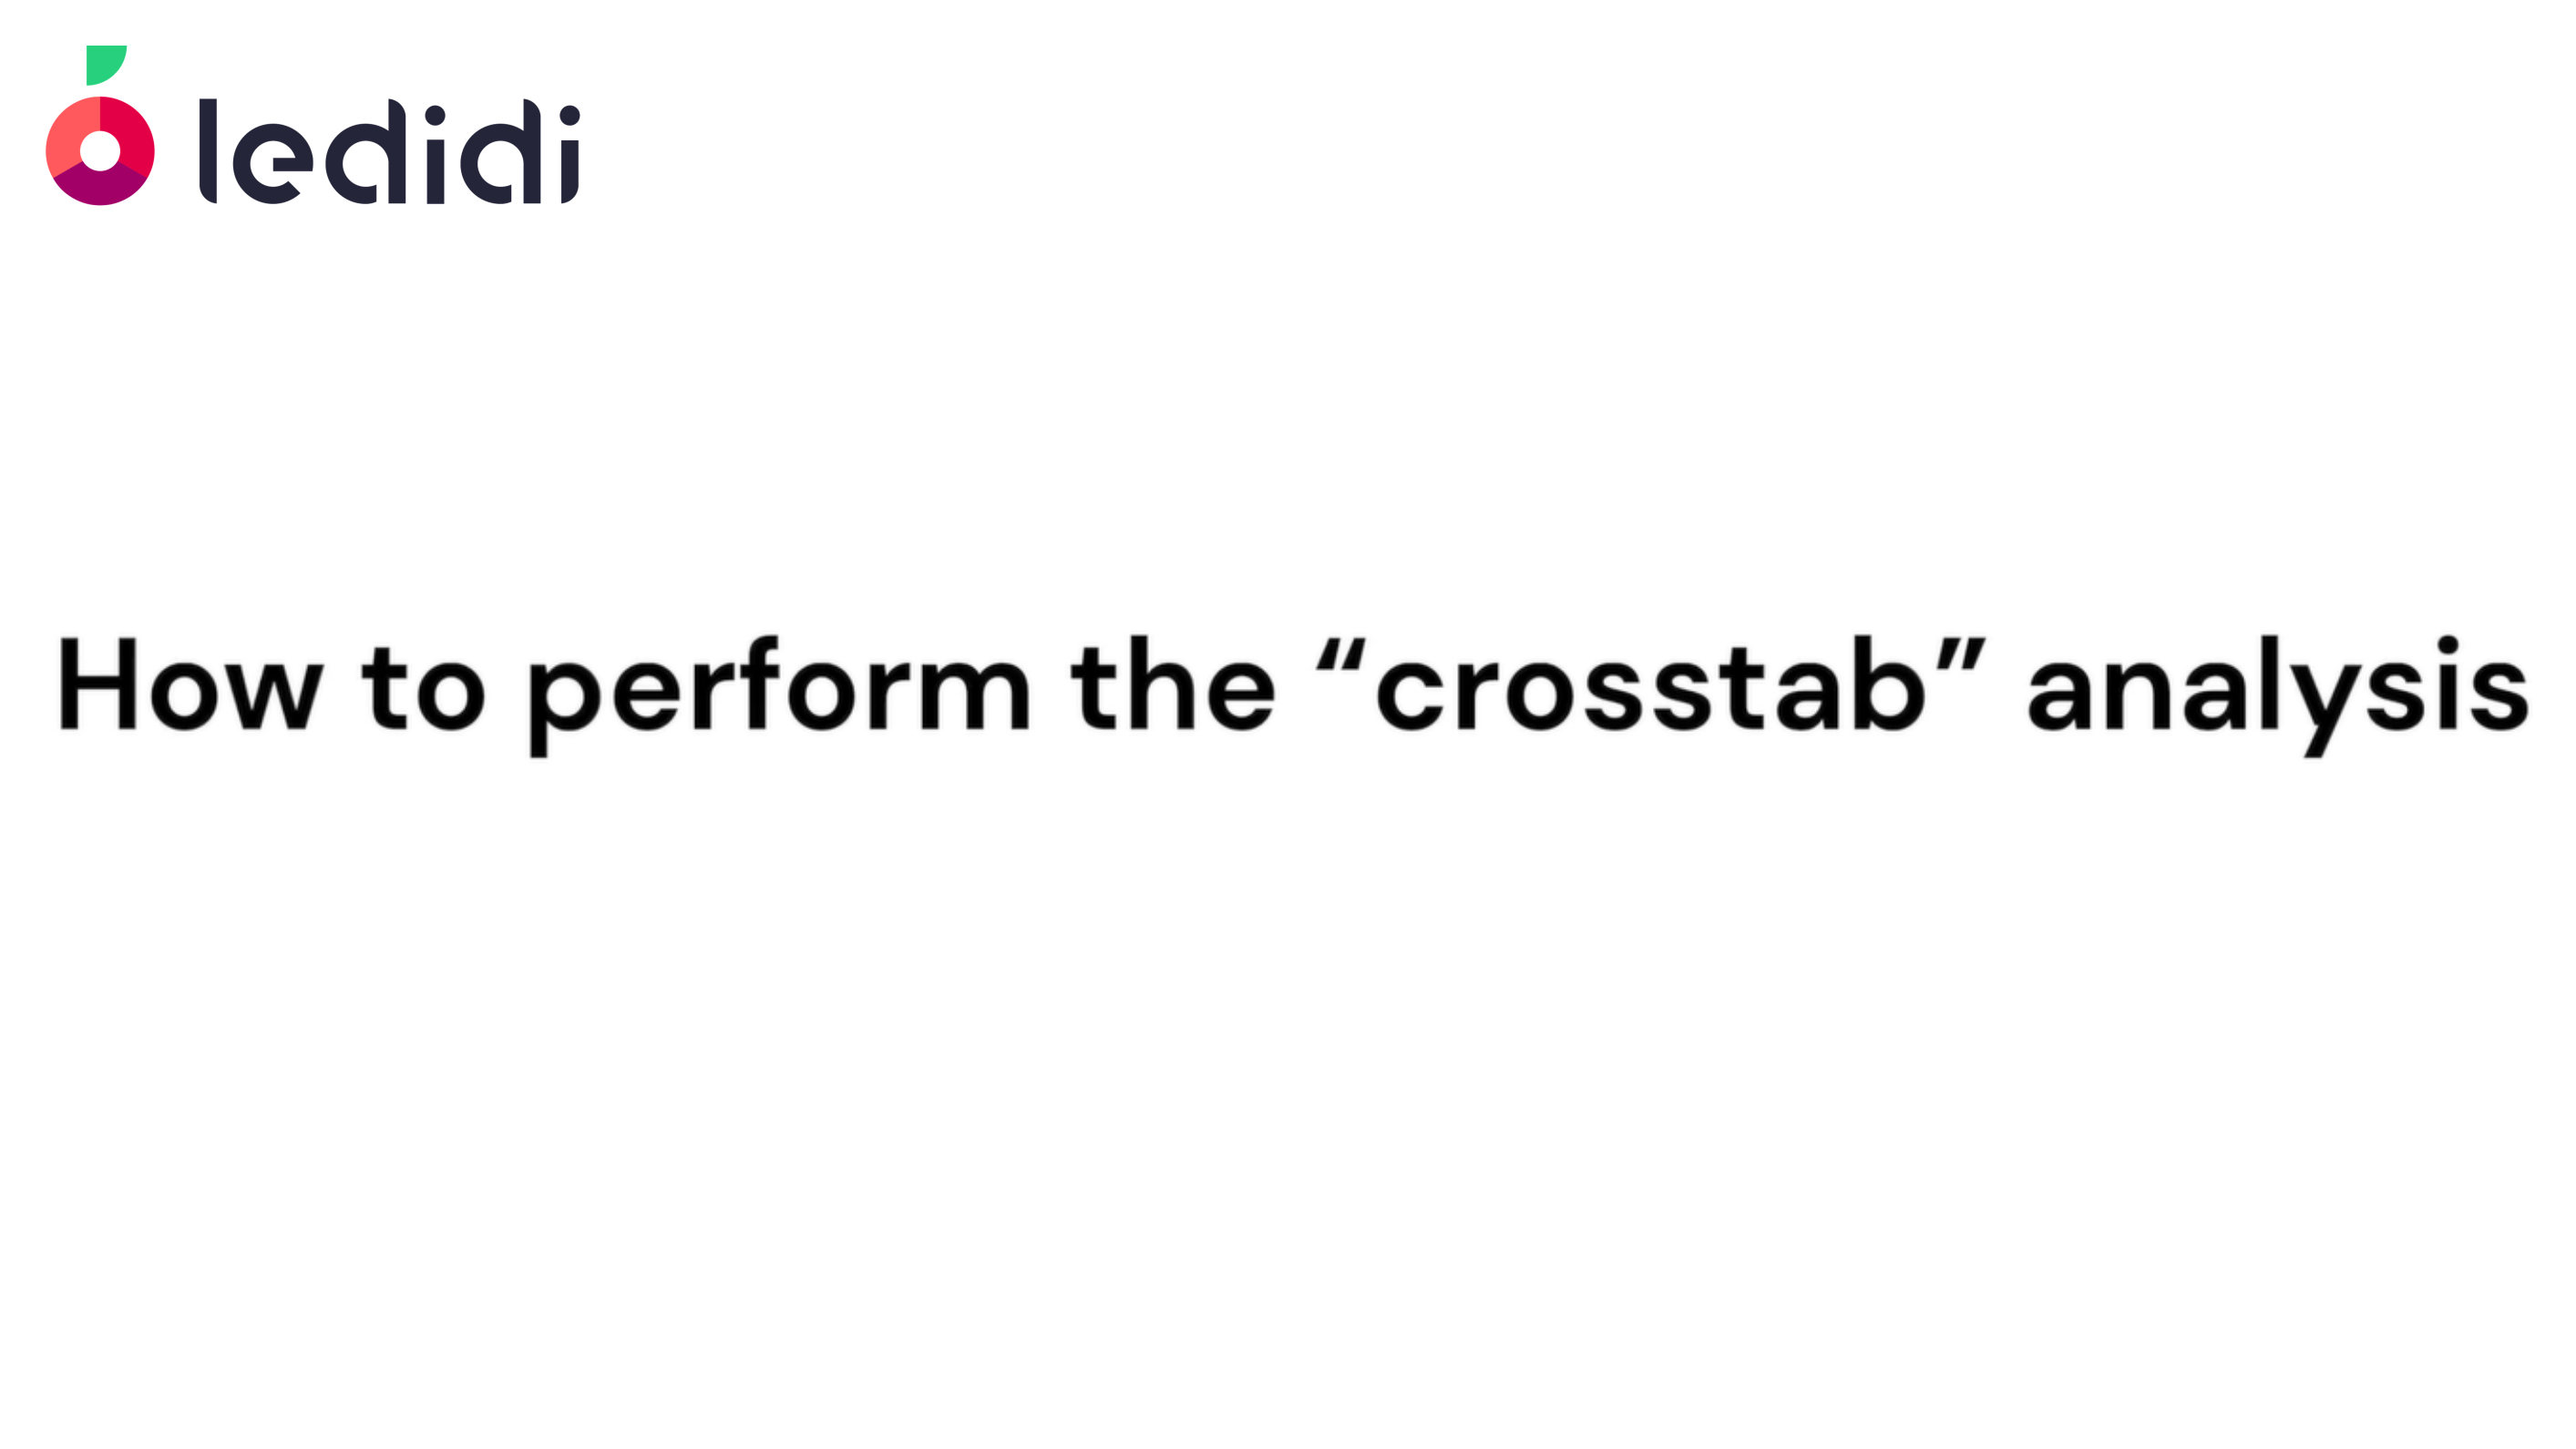 How to perform the "crosstab" analysis